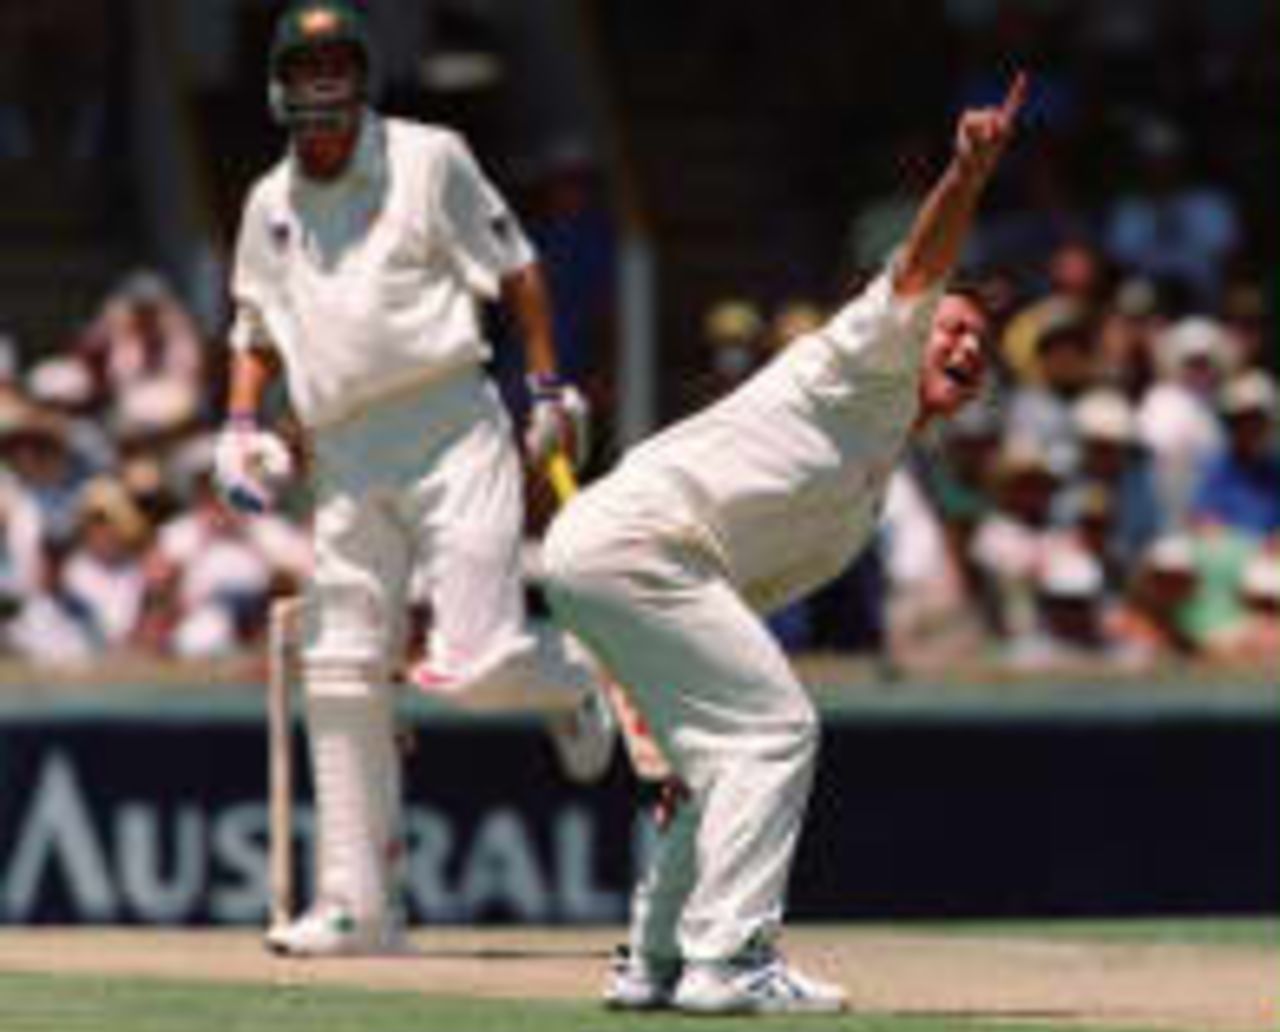 Gough appeals for an LBW against Gillespie The Ashes, 1998/99, 2nd Test Australia v England WACA Ground, Perth 28,29,30 November 1998